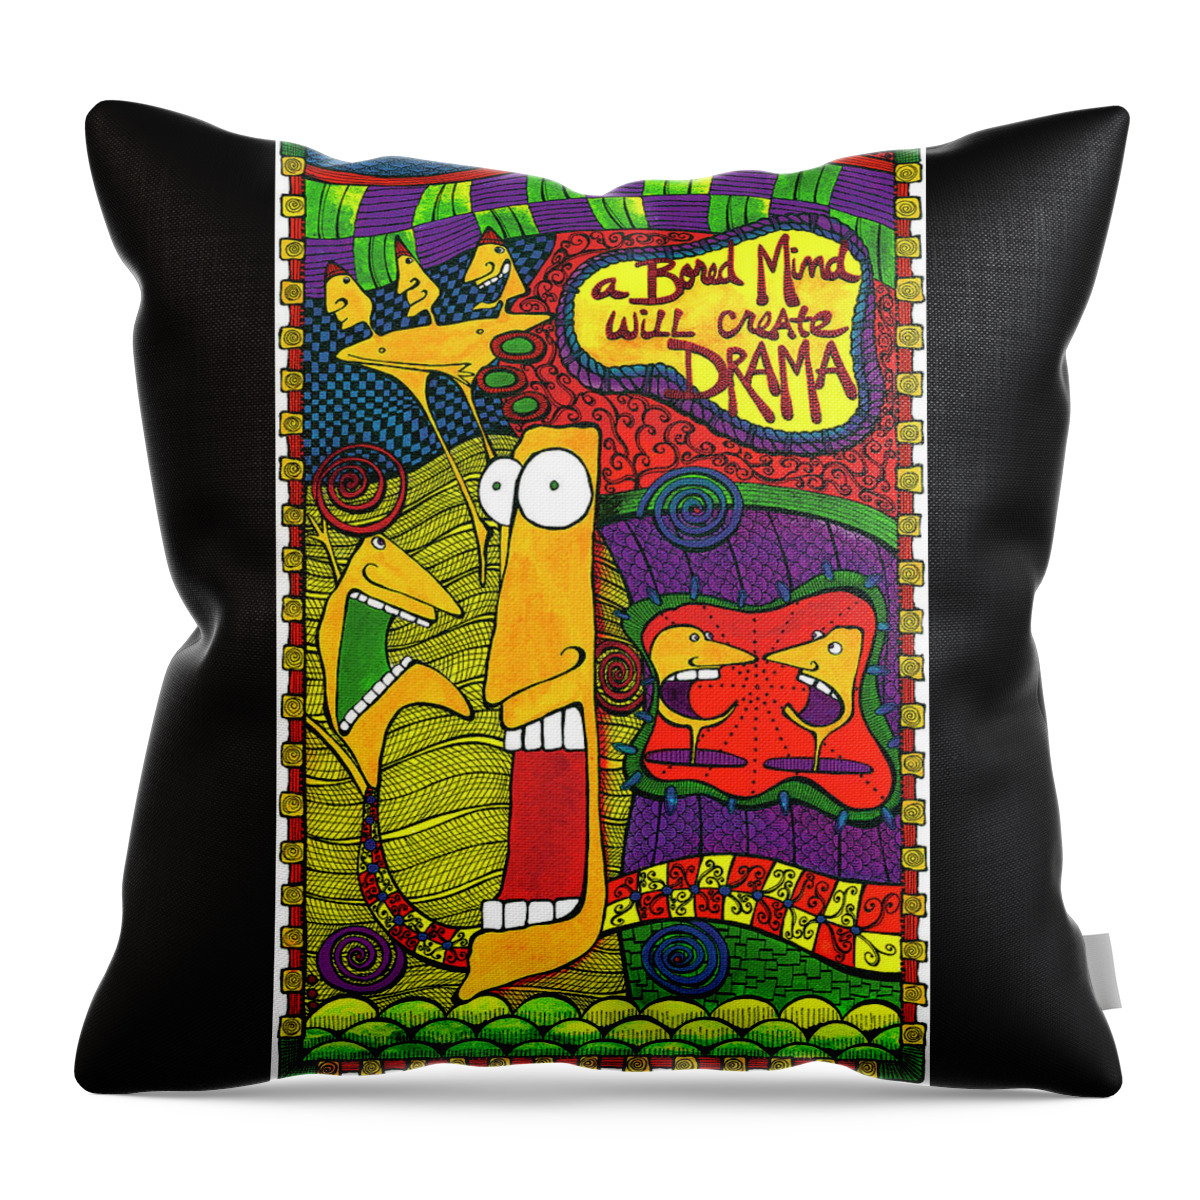 Gallery Throw Pillow featuring the painting Bored Mind by Dar Freeland